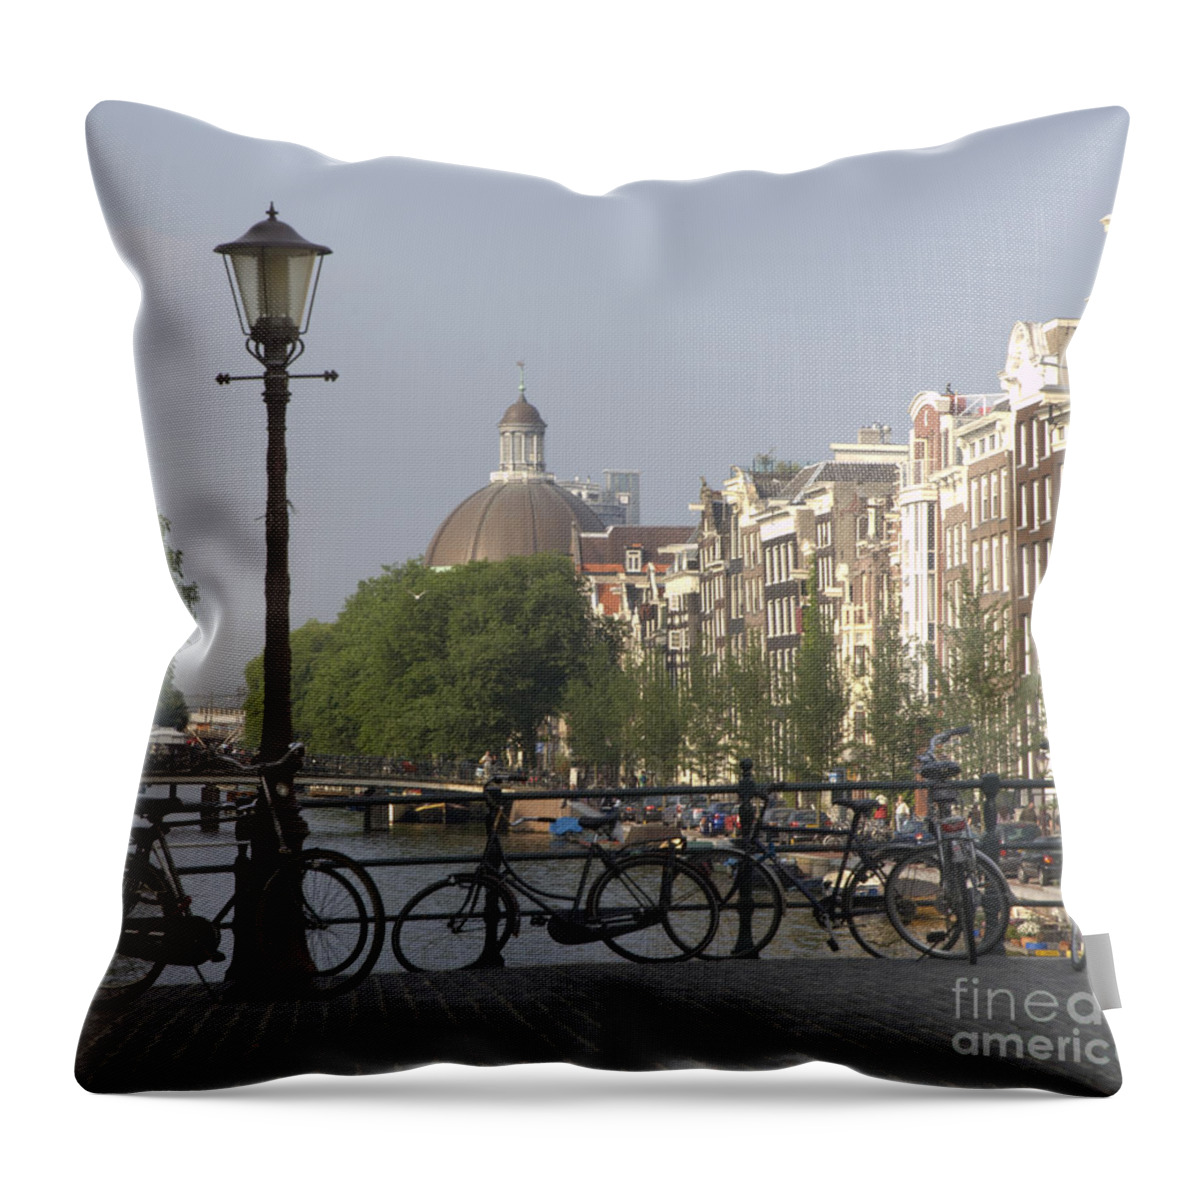 Amsterdam Throw Pillow featuring the photograph Amsterdam Bridge by Andy Smy